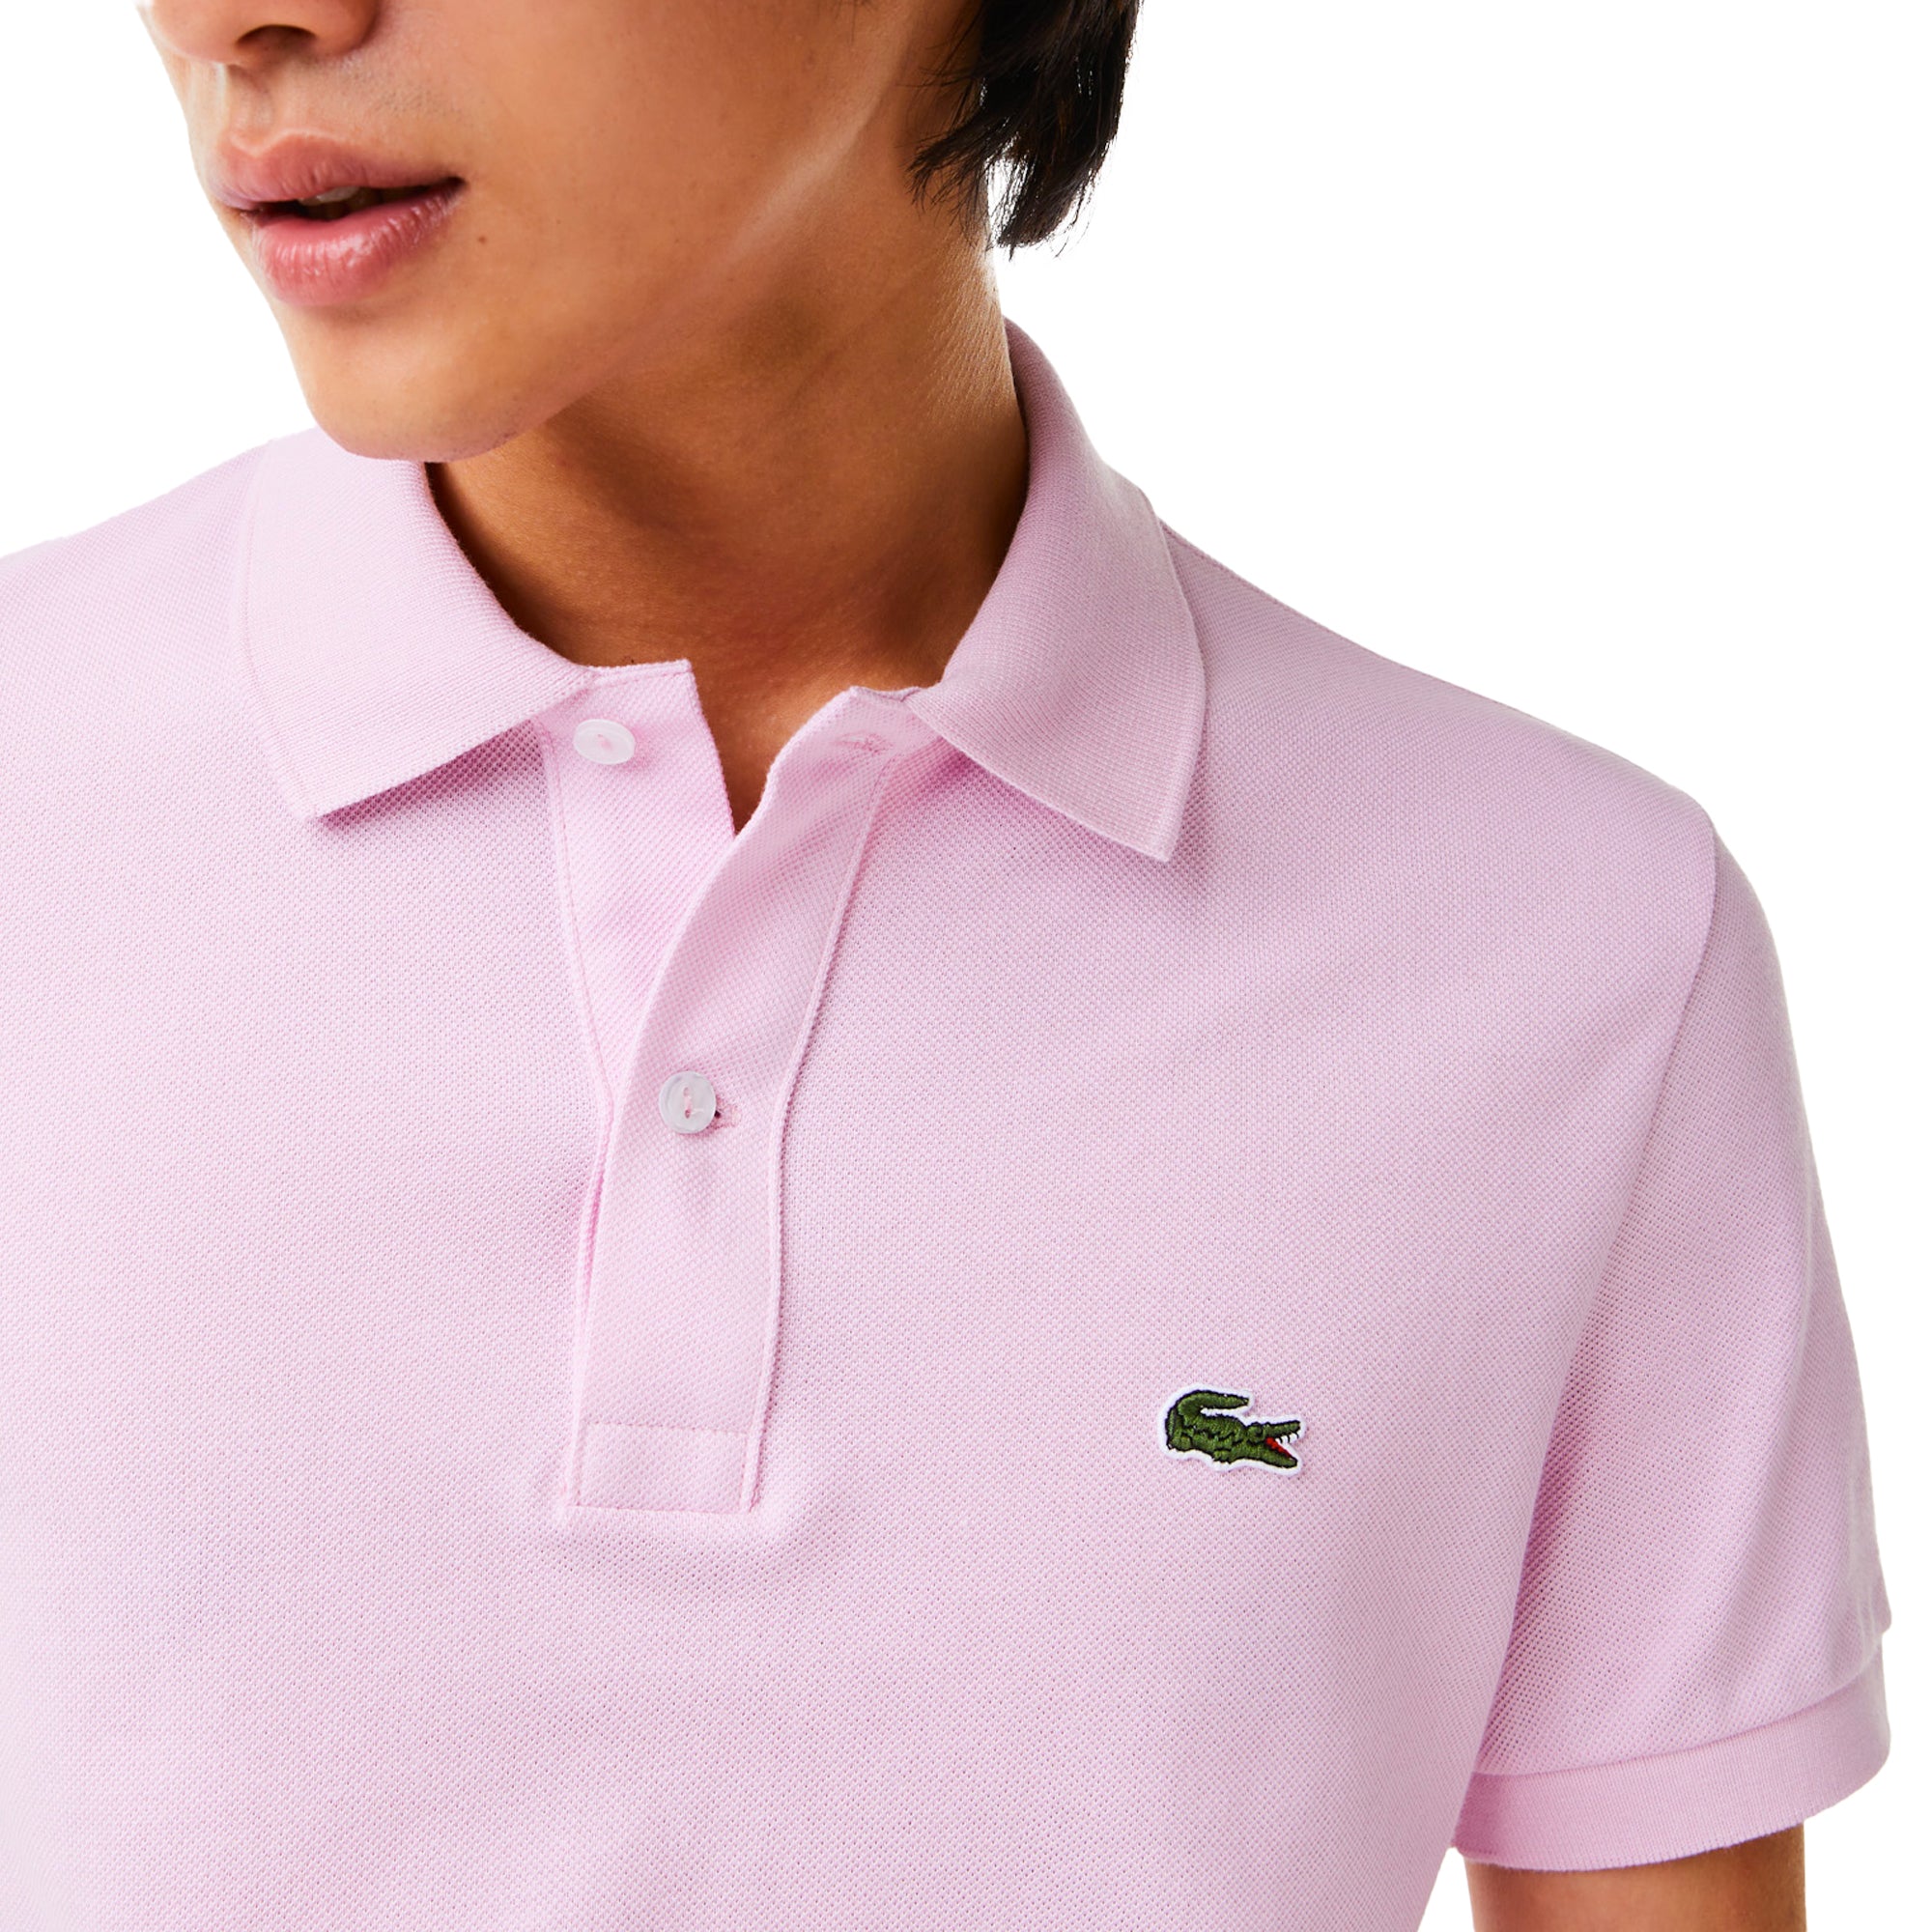 Lacoste Short Sleeved Slim Fit Polo PH4012 - Albizia Pink